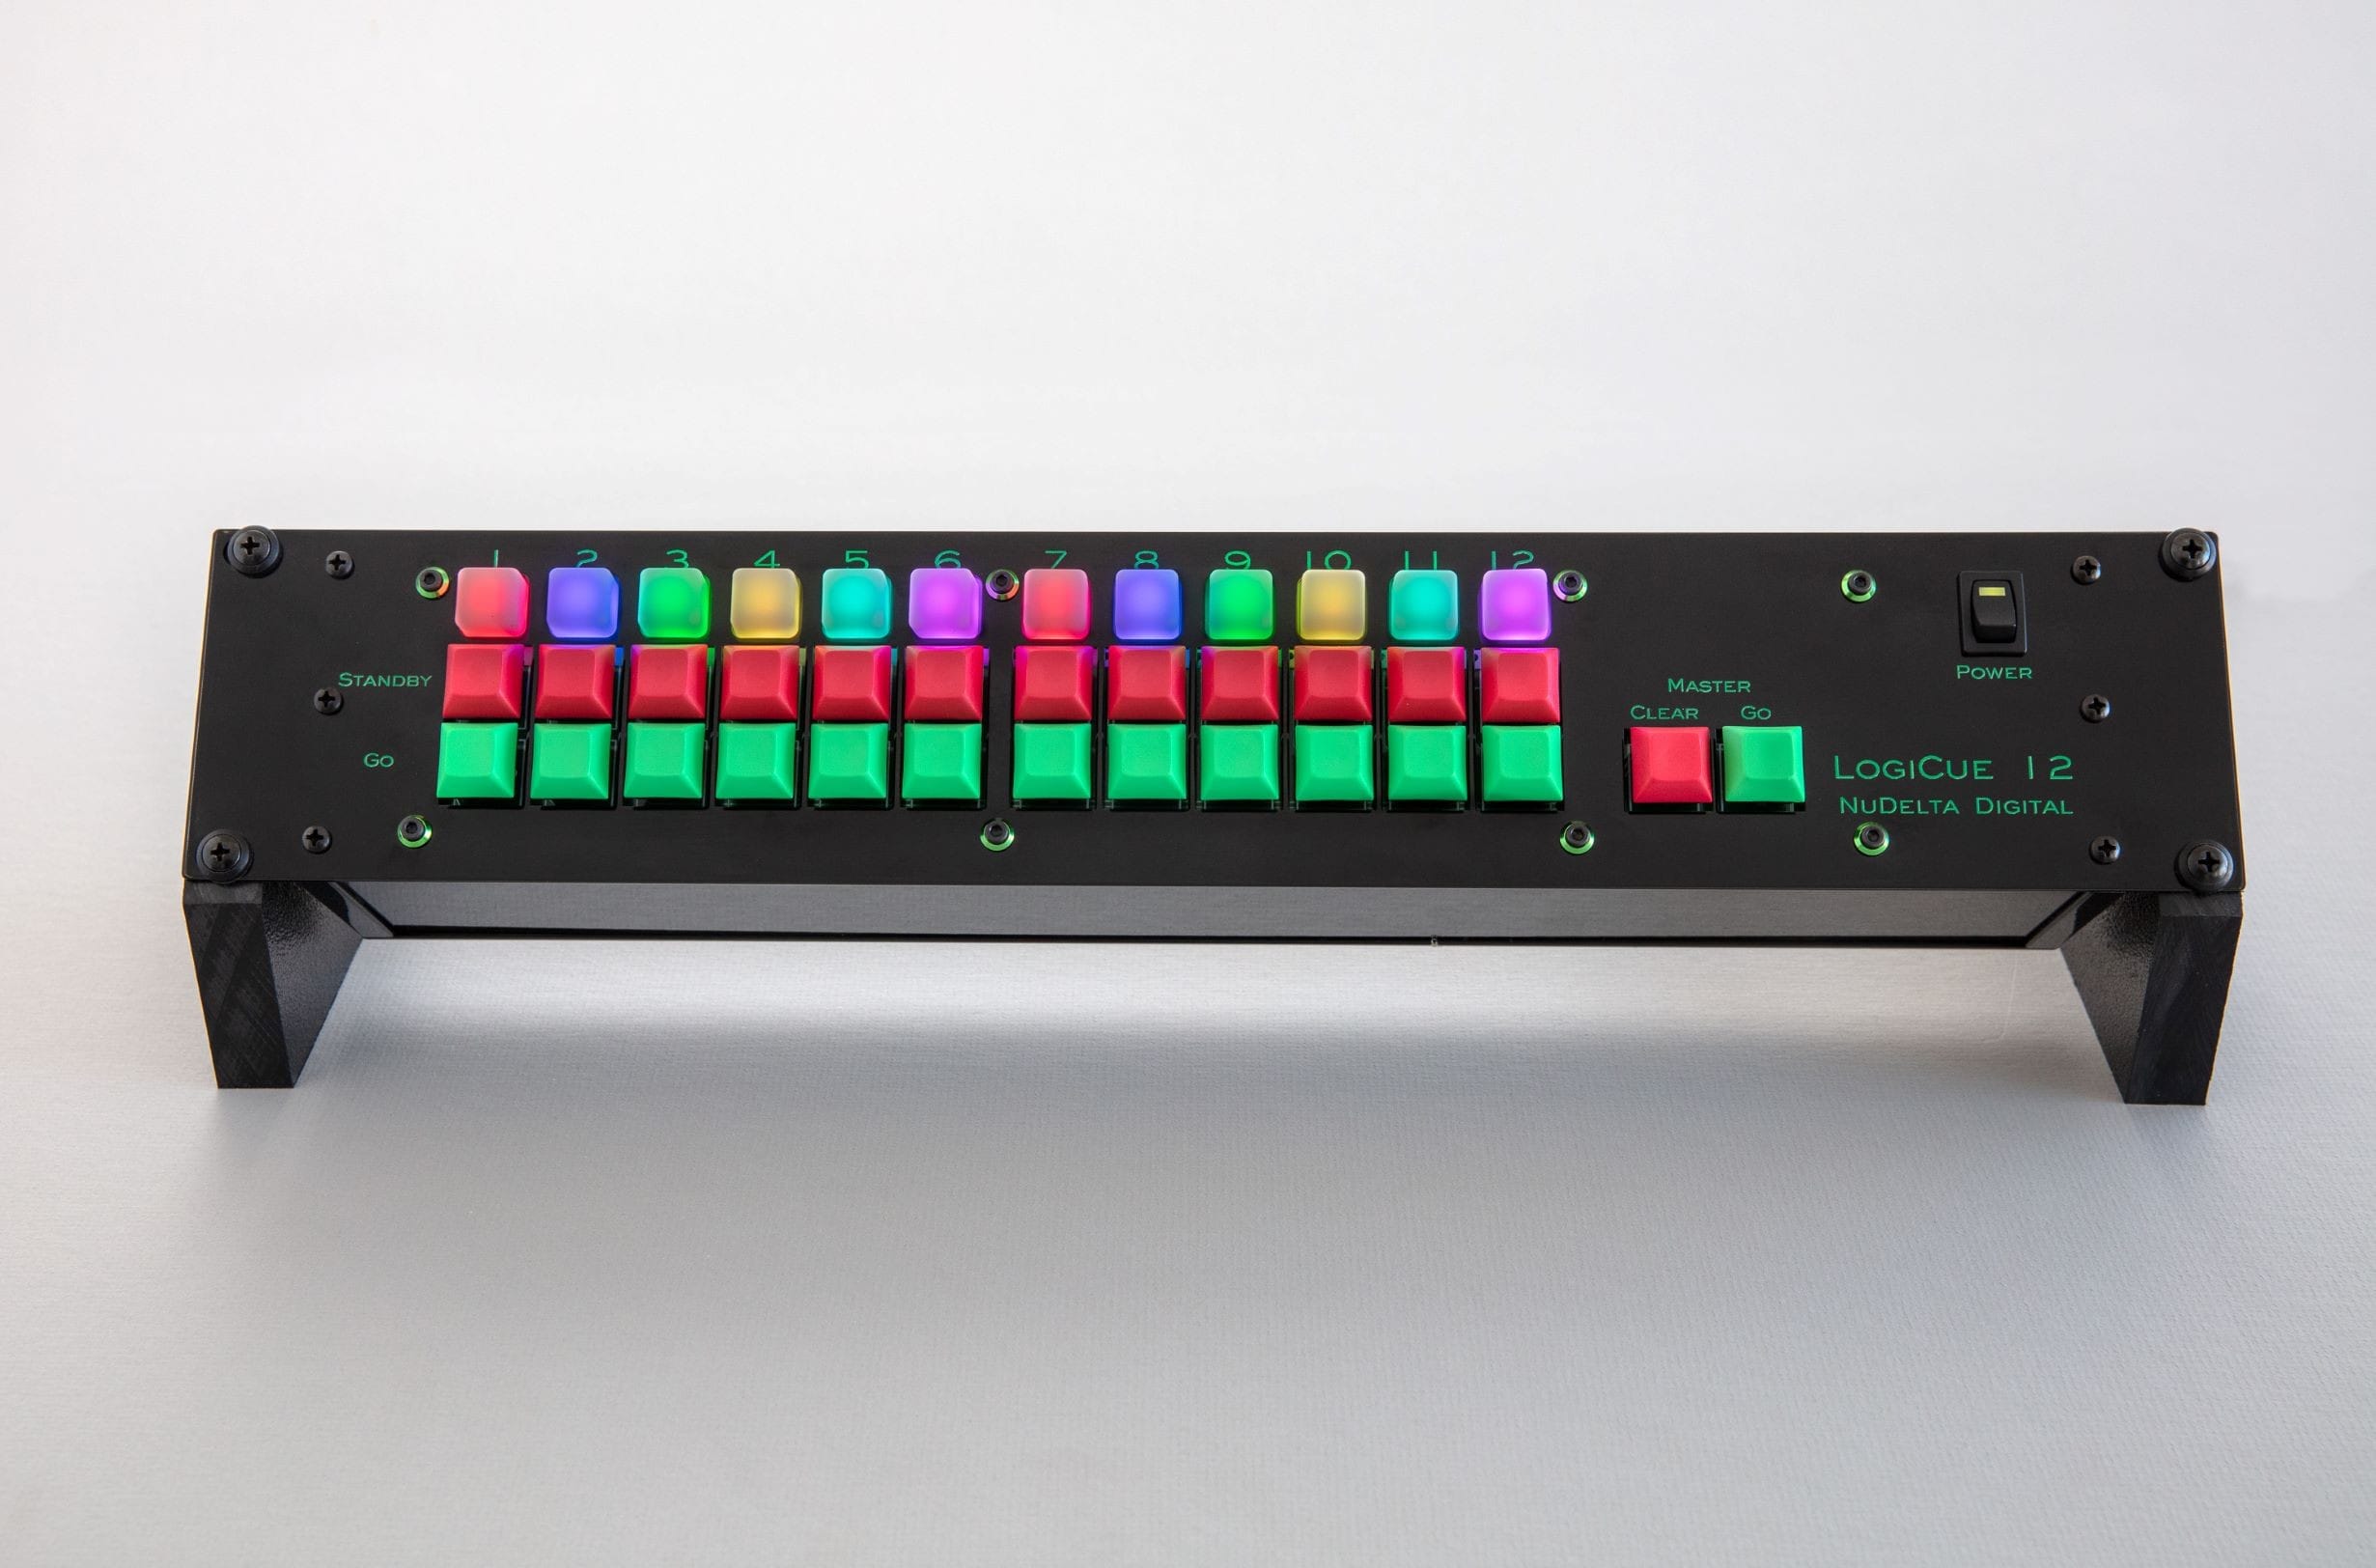 A picture of the LogiCue 12 Digital Cue Light Controller turned on and each light emitting diode illuminated in a different color.